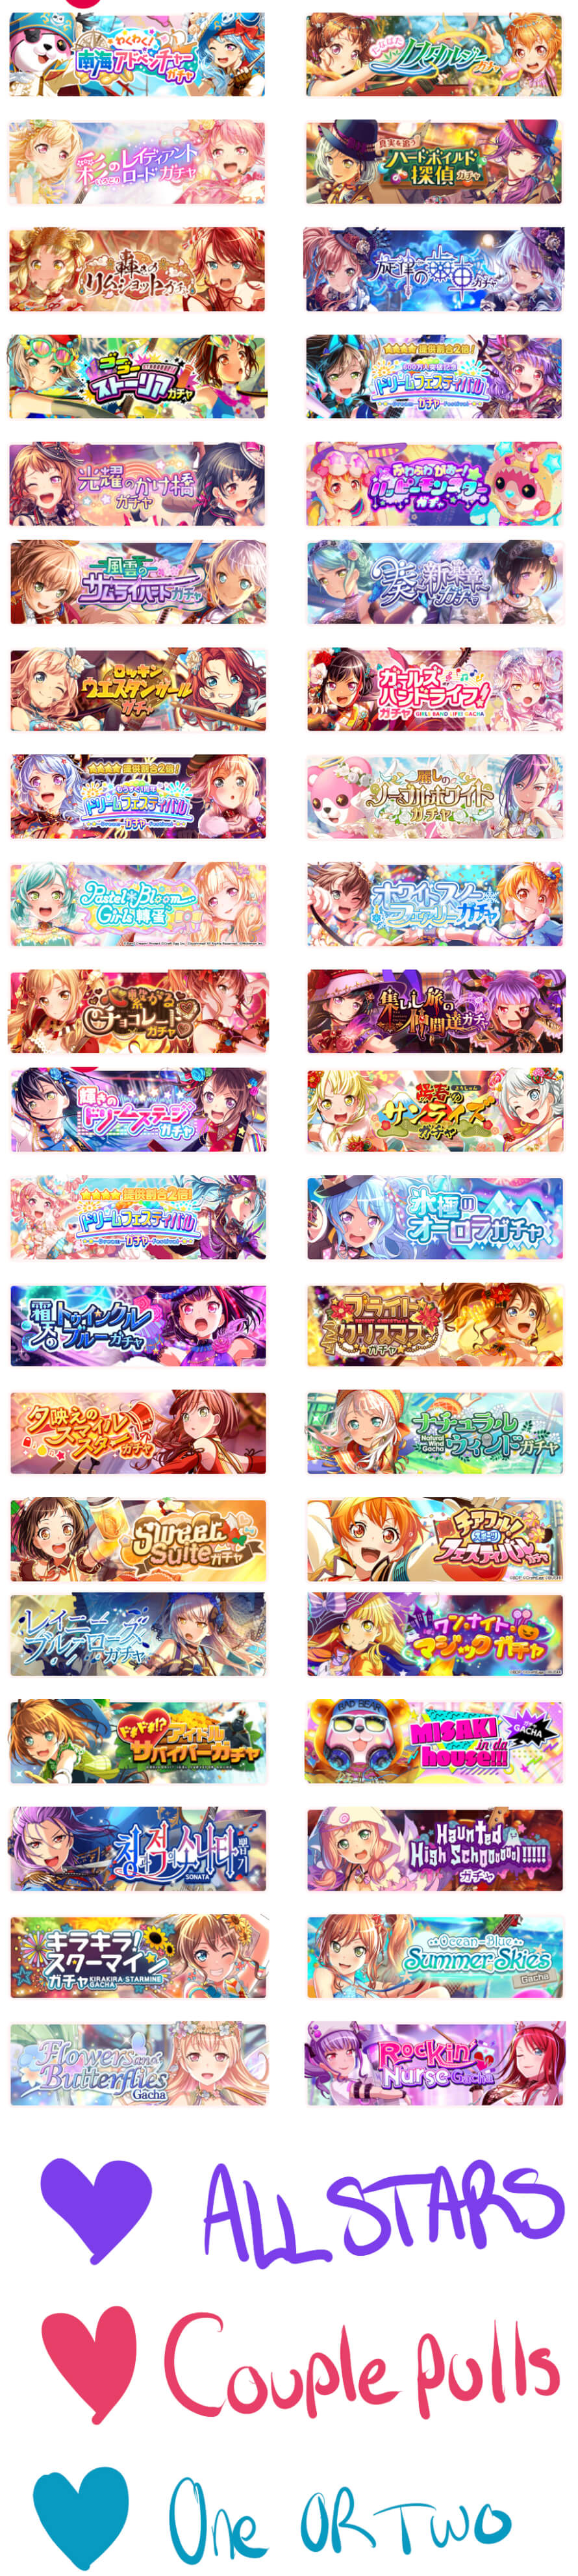 Post for blank template of gacha pull records for anyone who wants because my picture too big for...